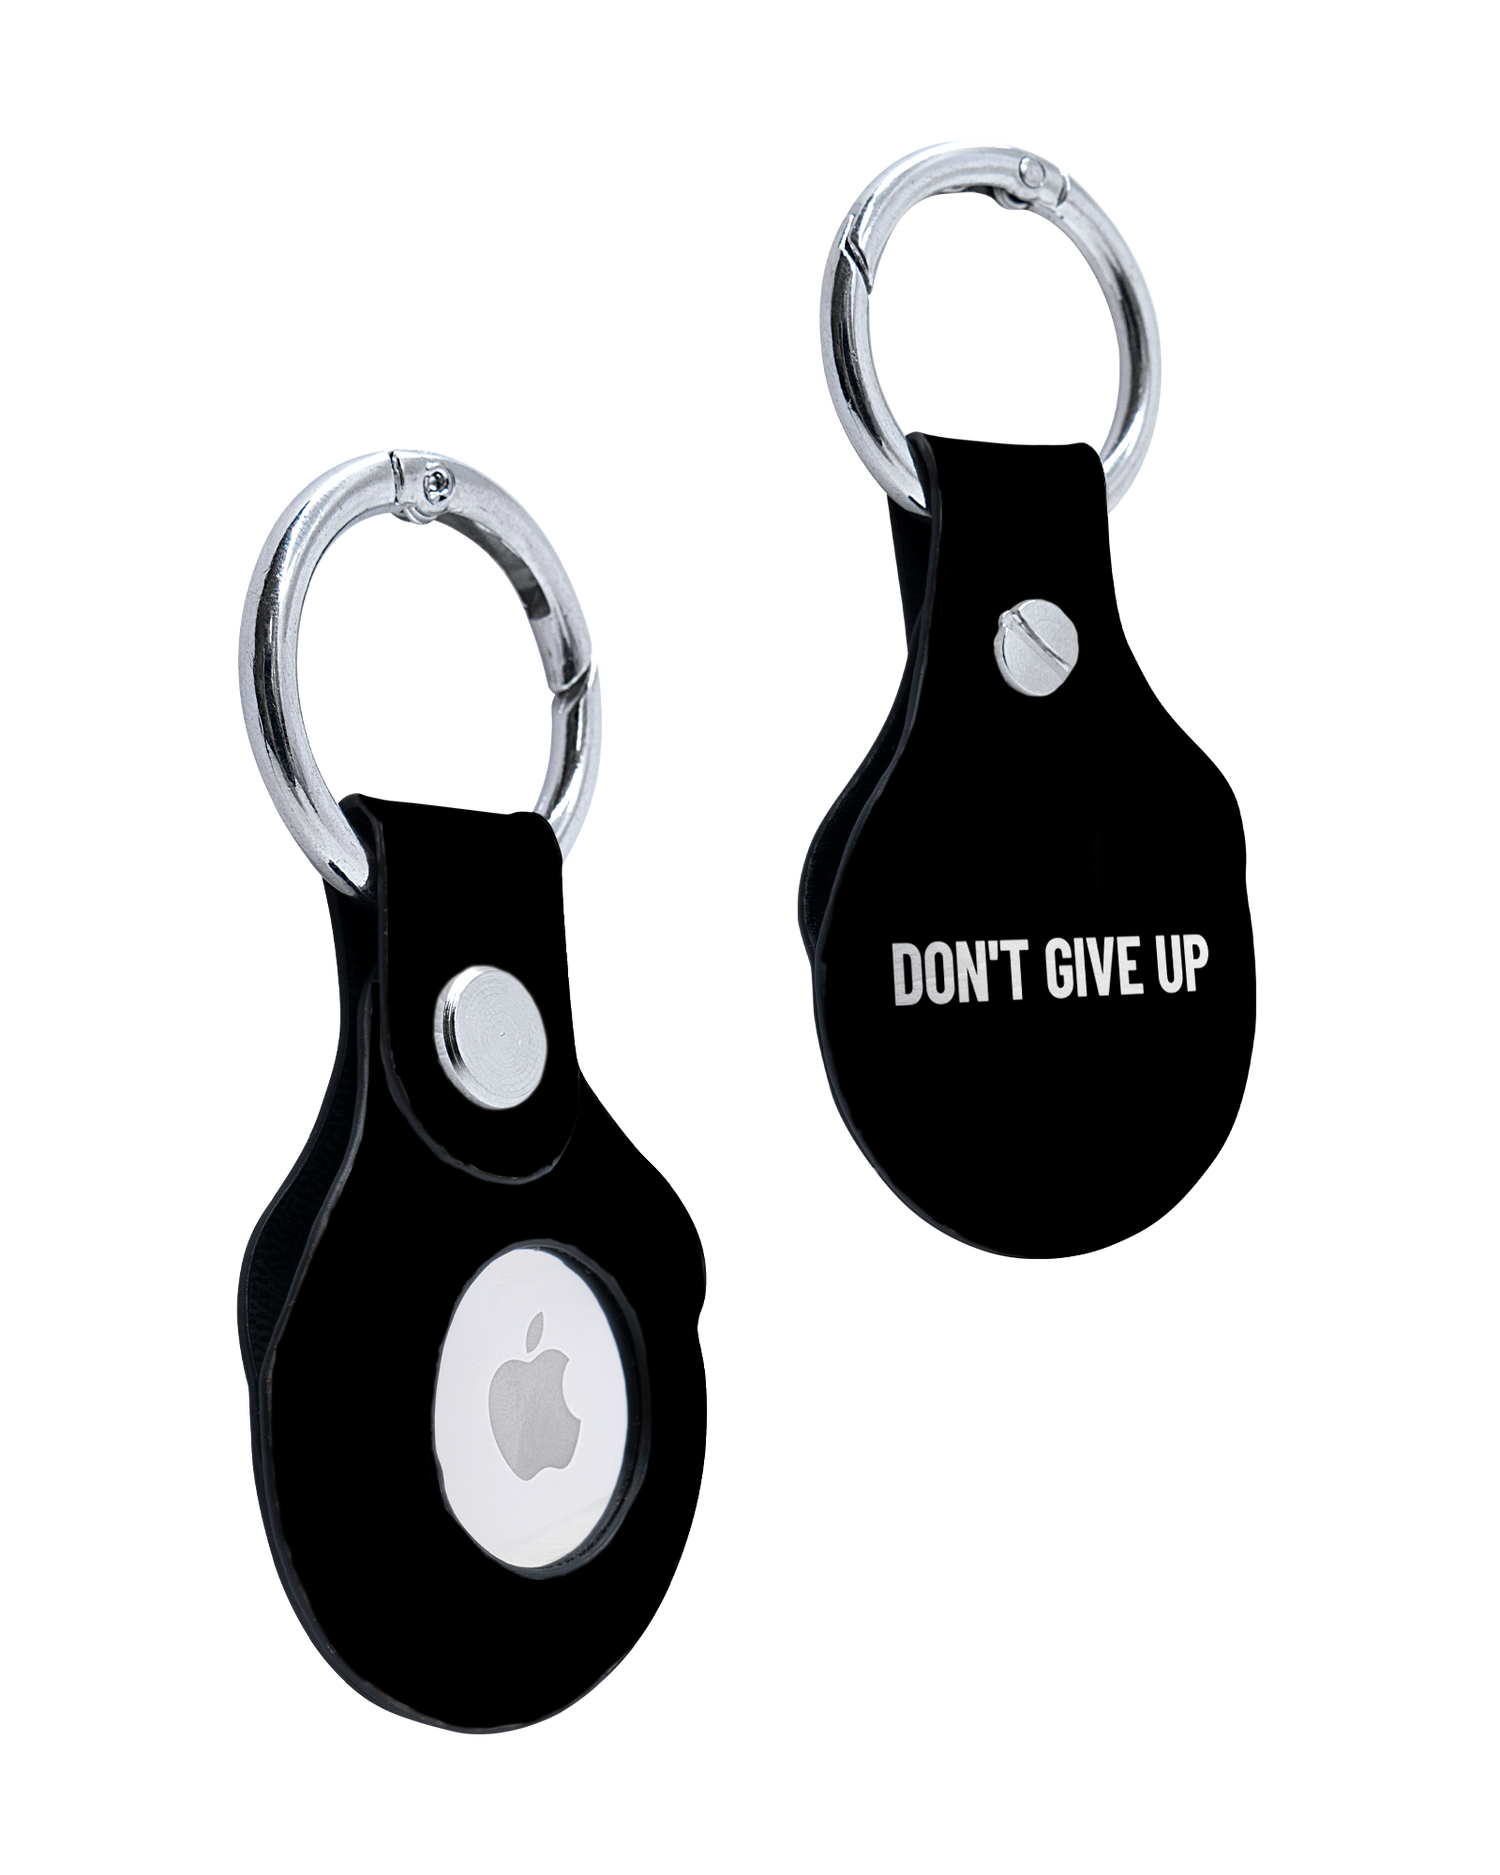 AirTag Holder with Dont Give Up Design: Front and Back